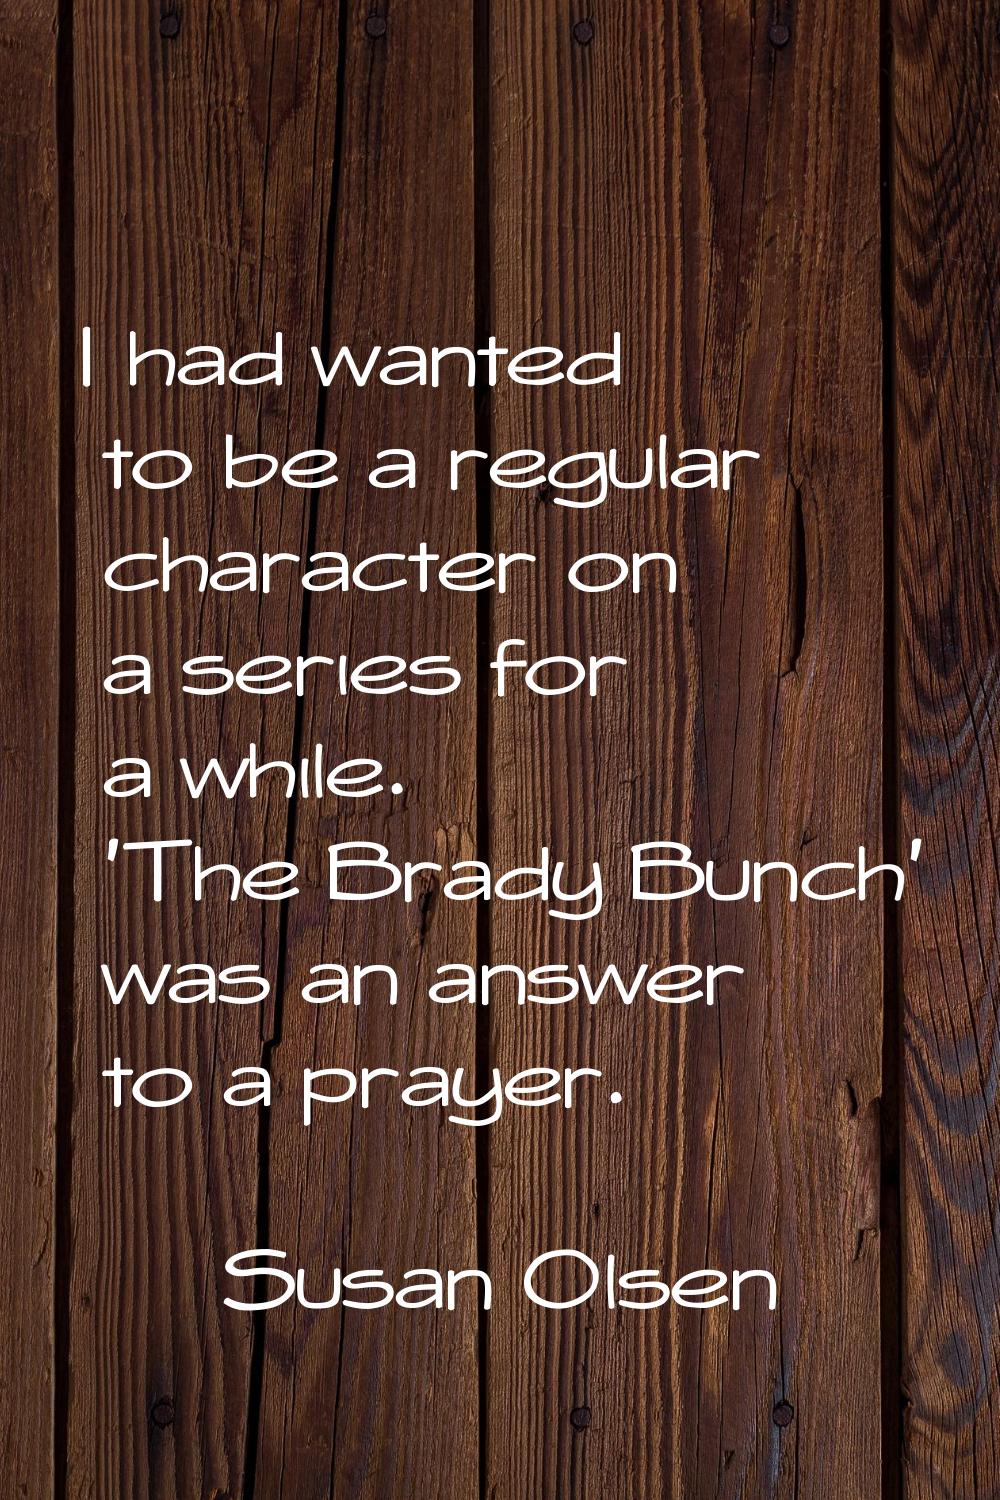 I had wanted to be a regular character on a series for a while. 'The Brady Bunch' was an answer to 